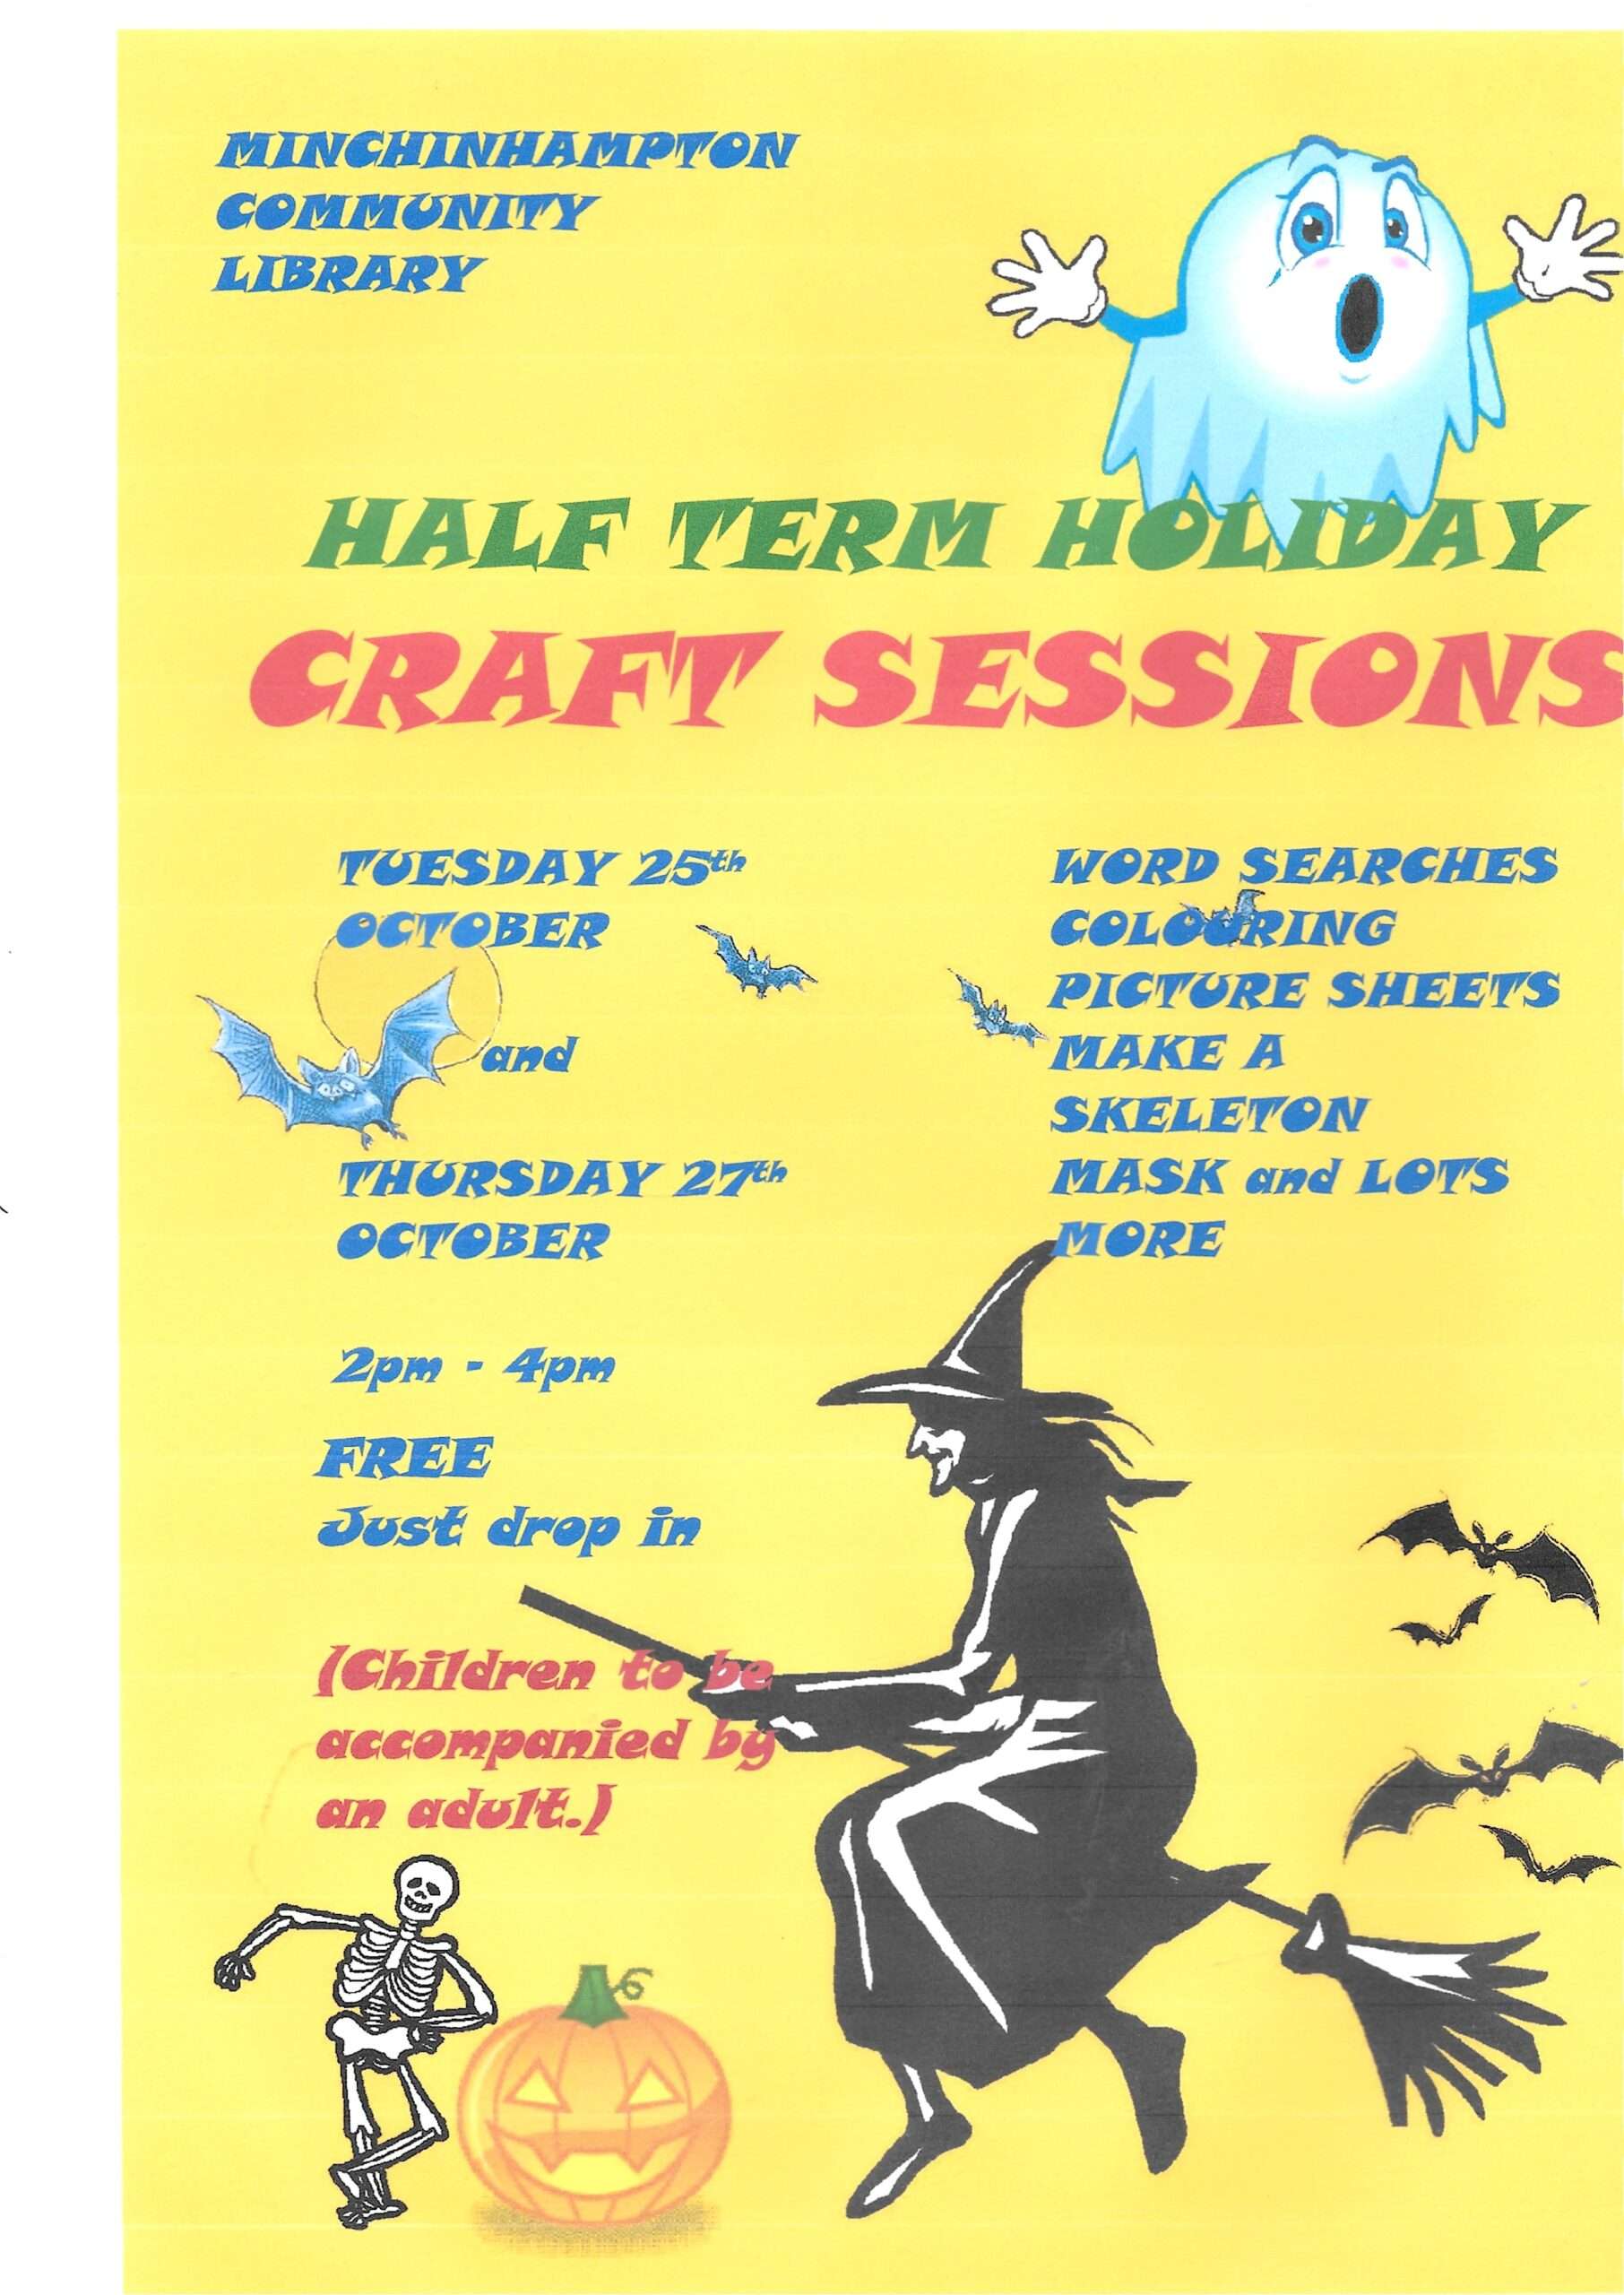 Half-term Holiday Craft Sessions!